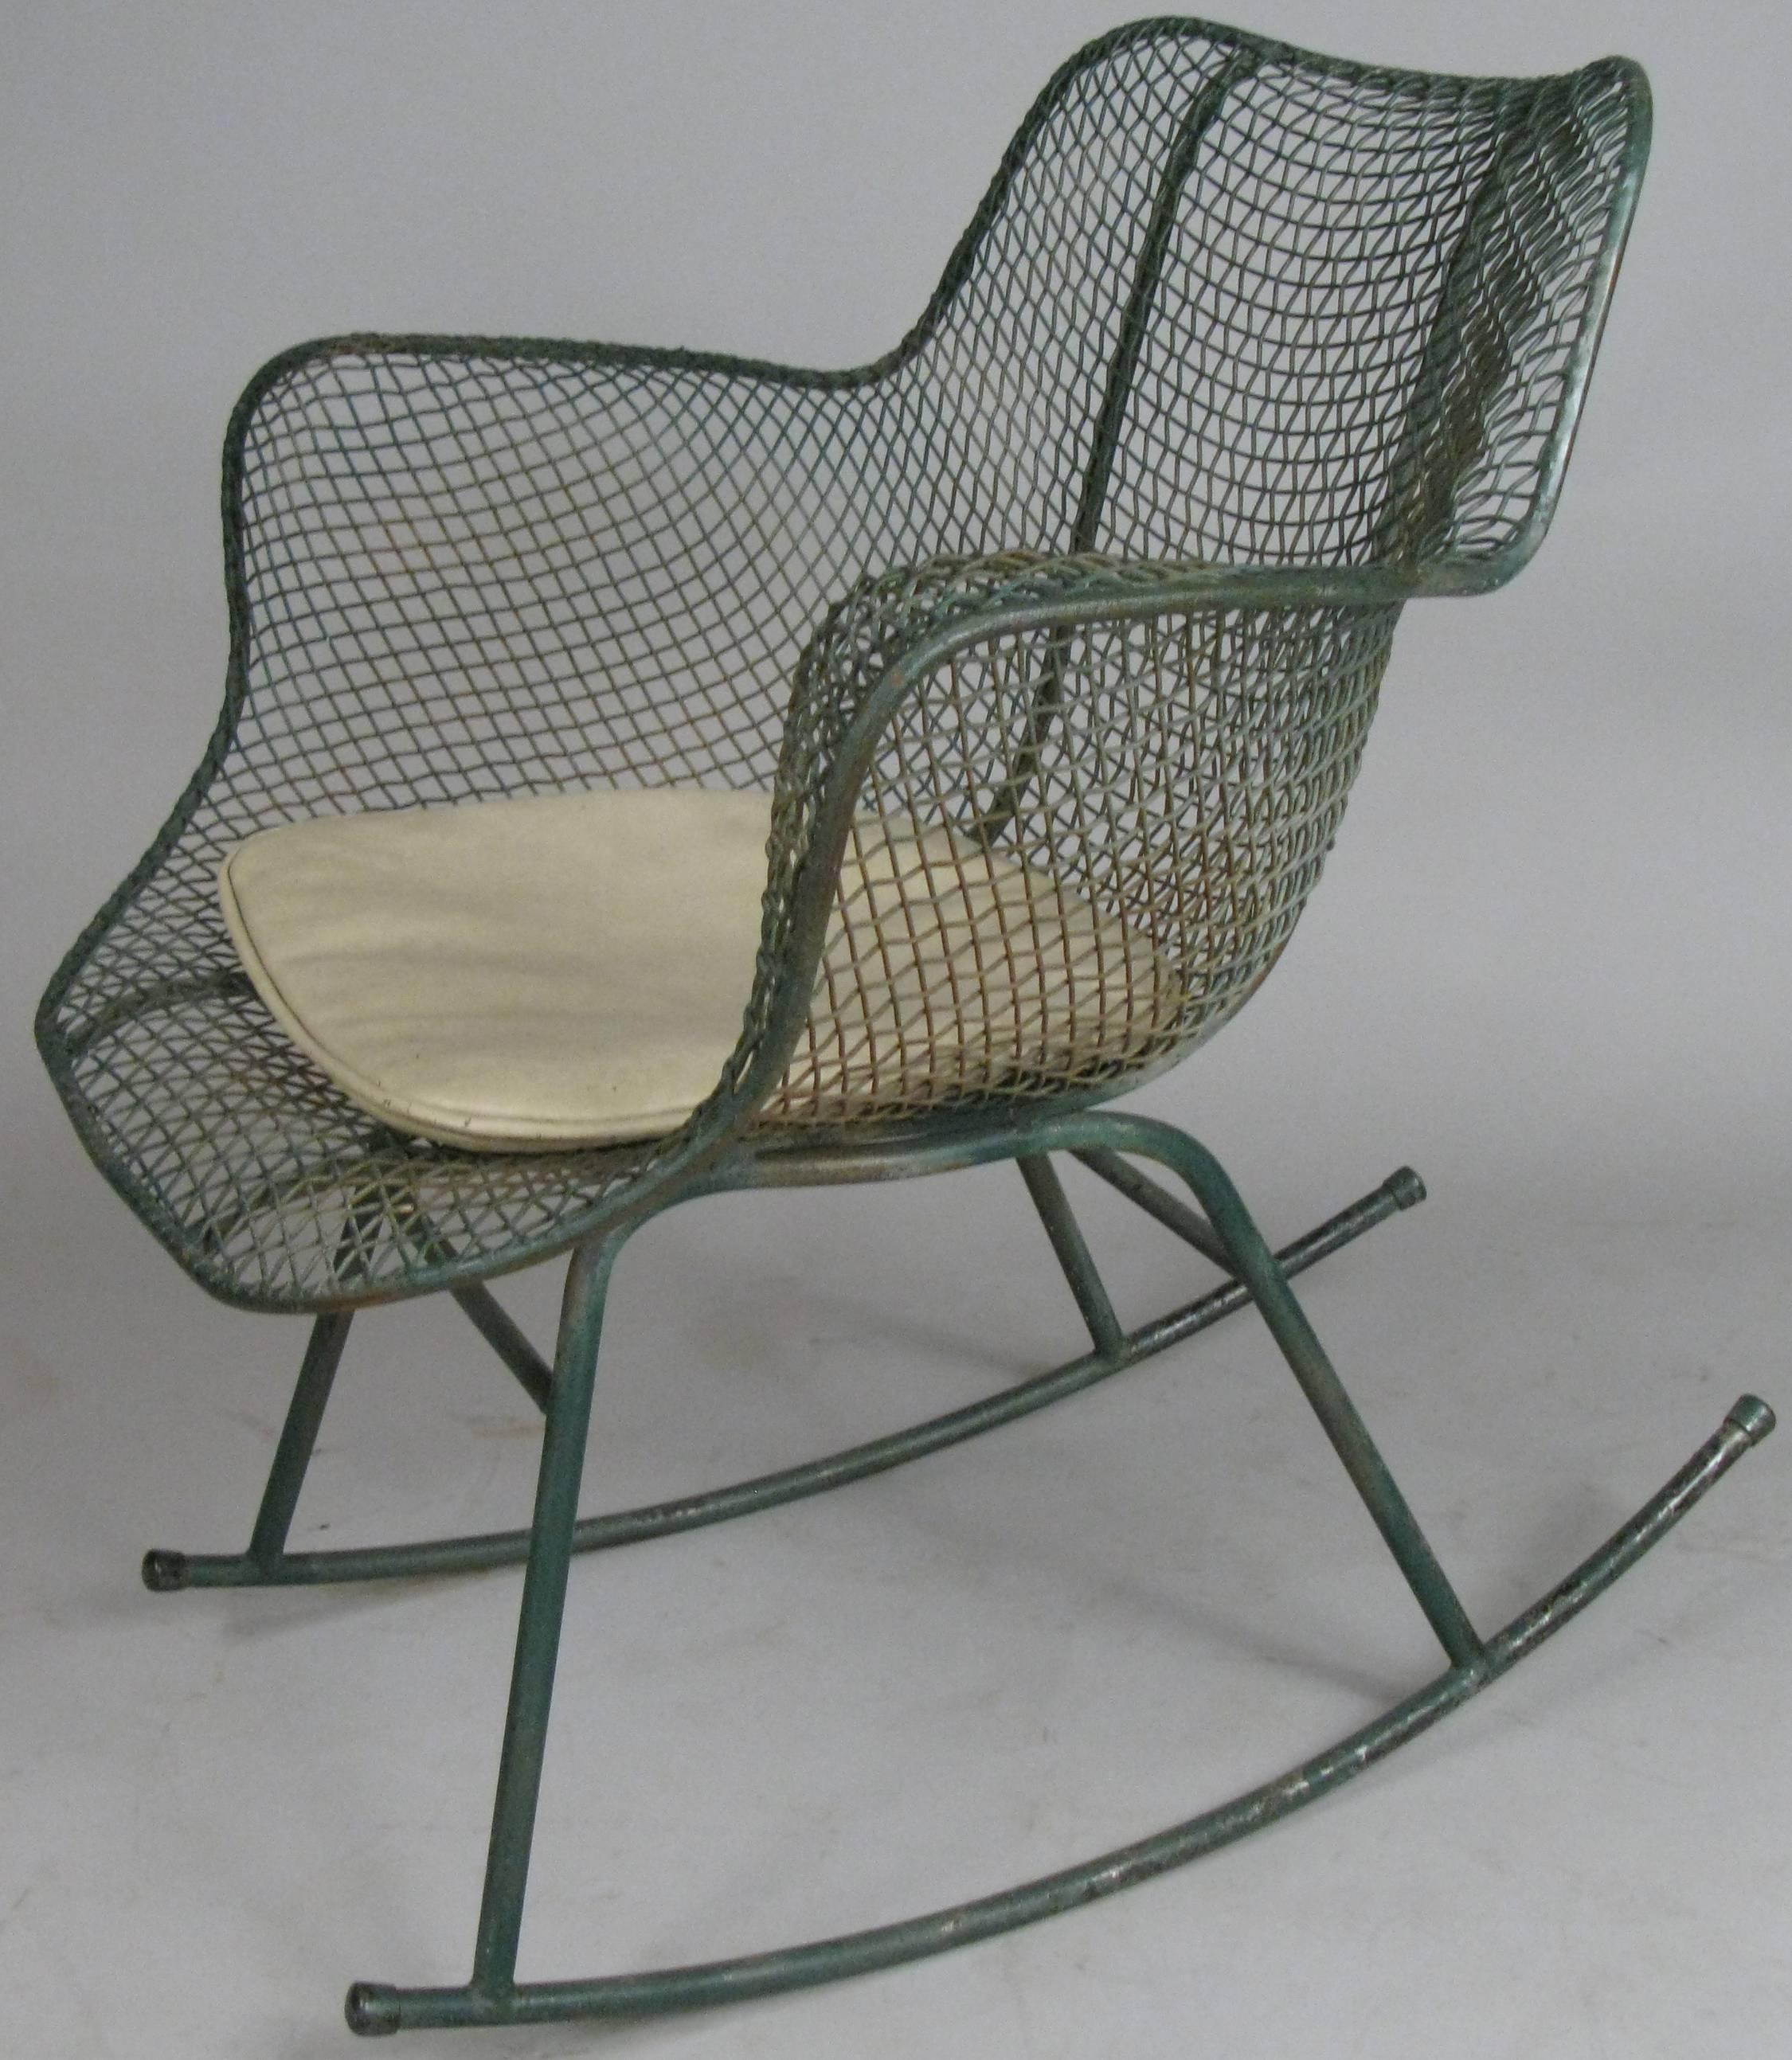 the classic and iconic vintage steel mesh Sculptura Rocking Chair designed in 1950 by Russell Woodard. in its original dark green finish, which is worn as expected for the age. can be custom finished in any color you choose. 